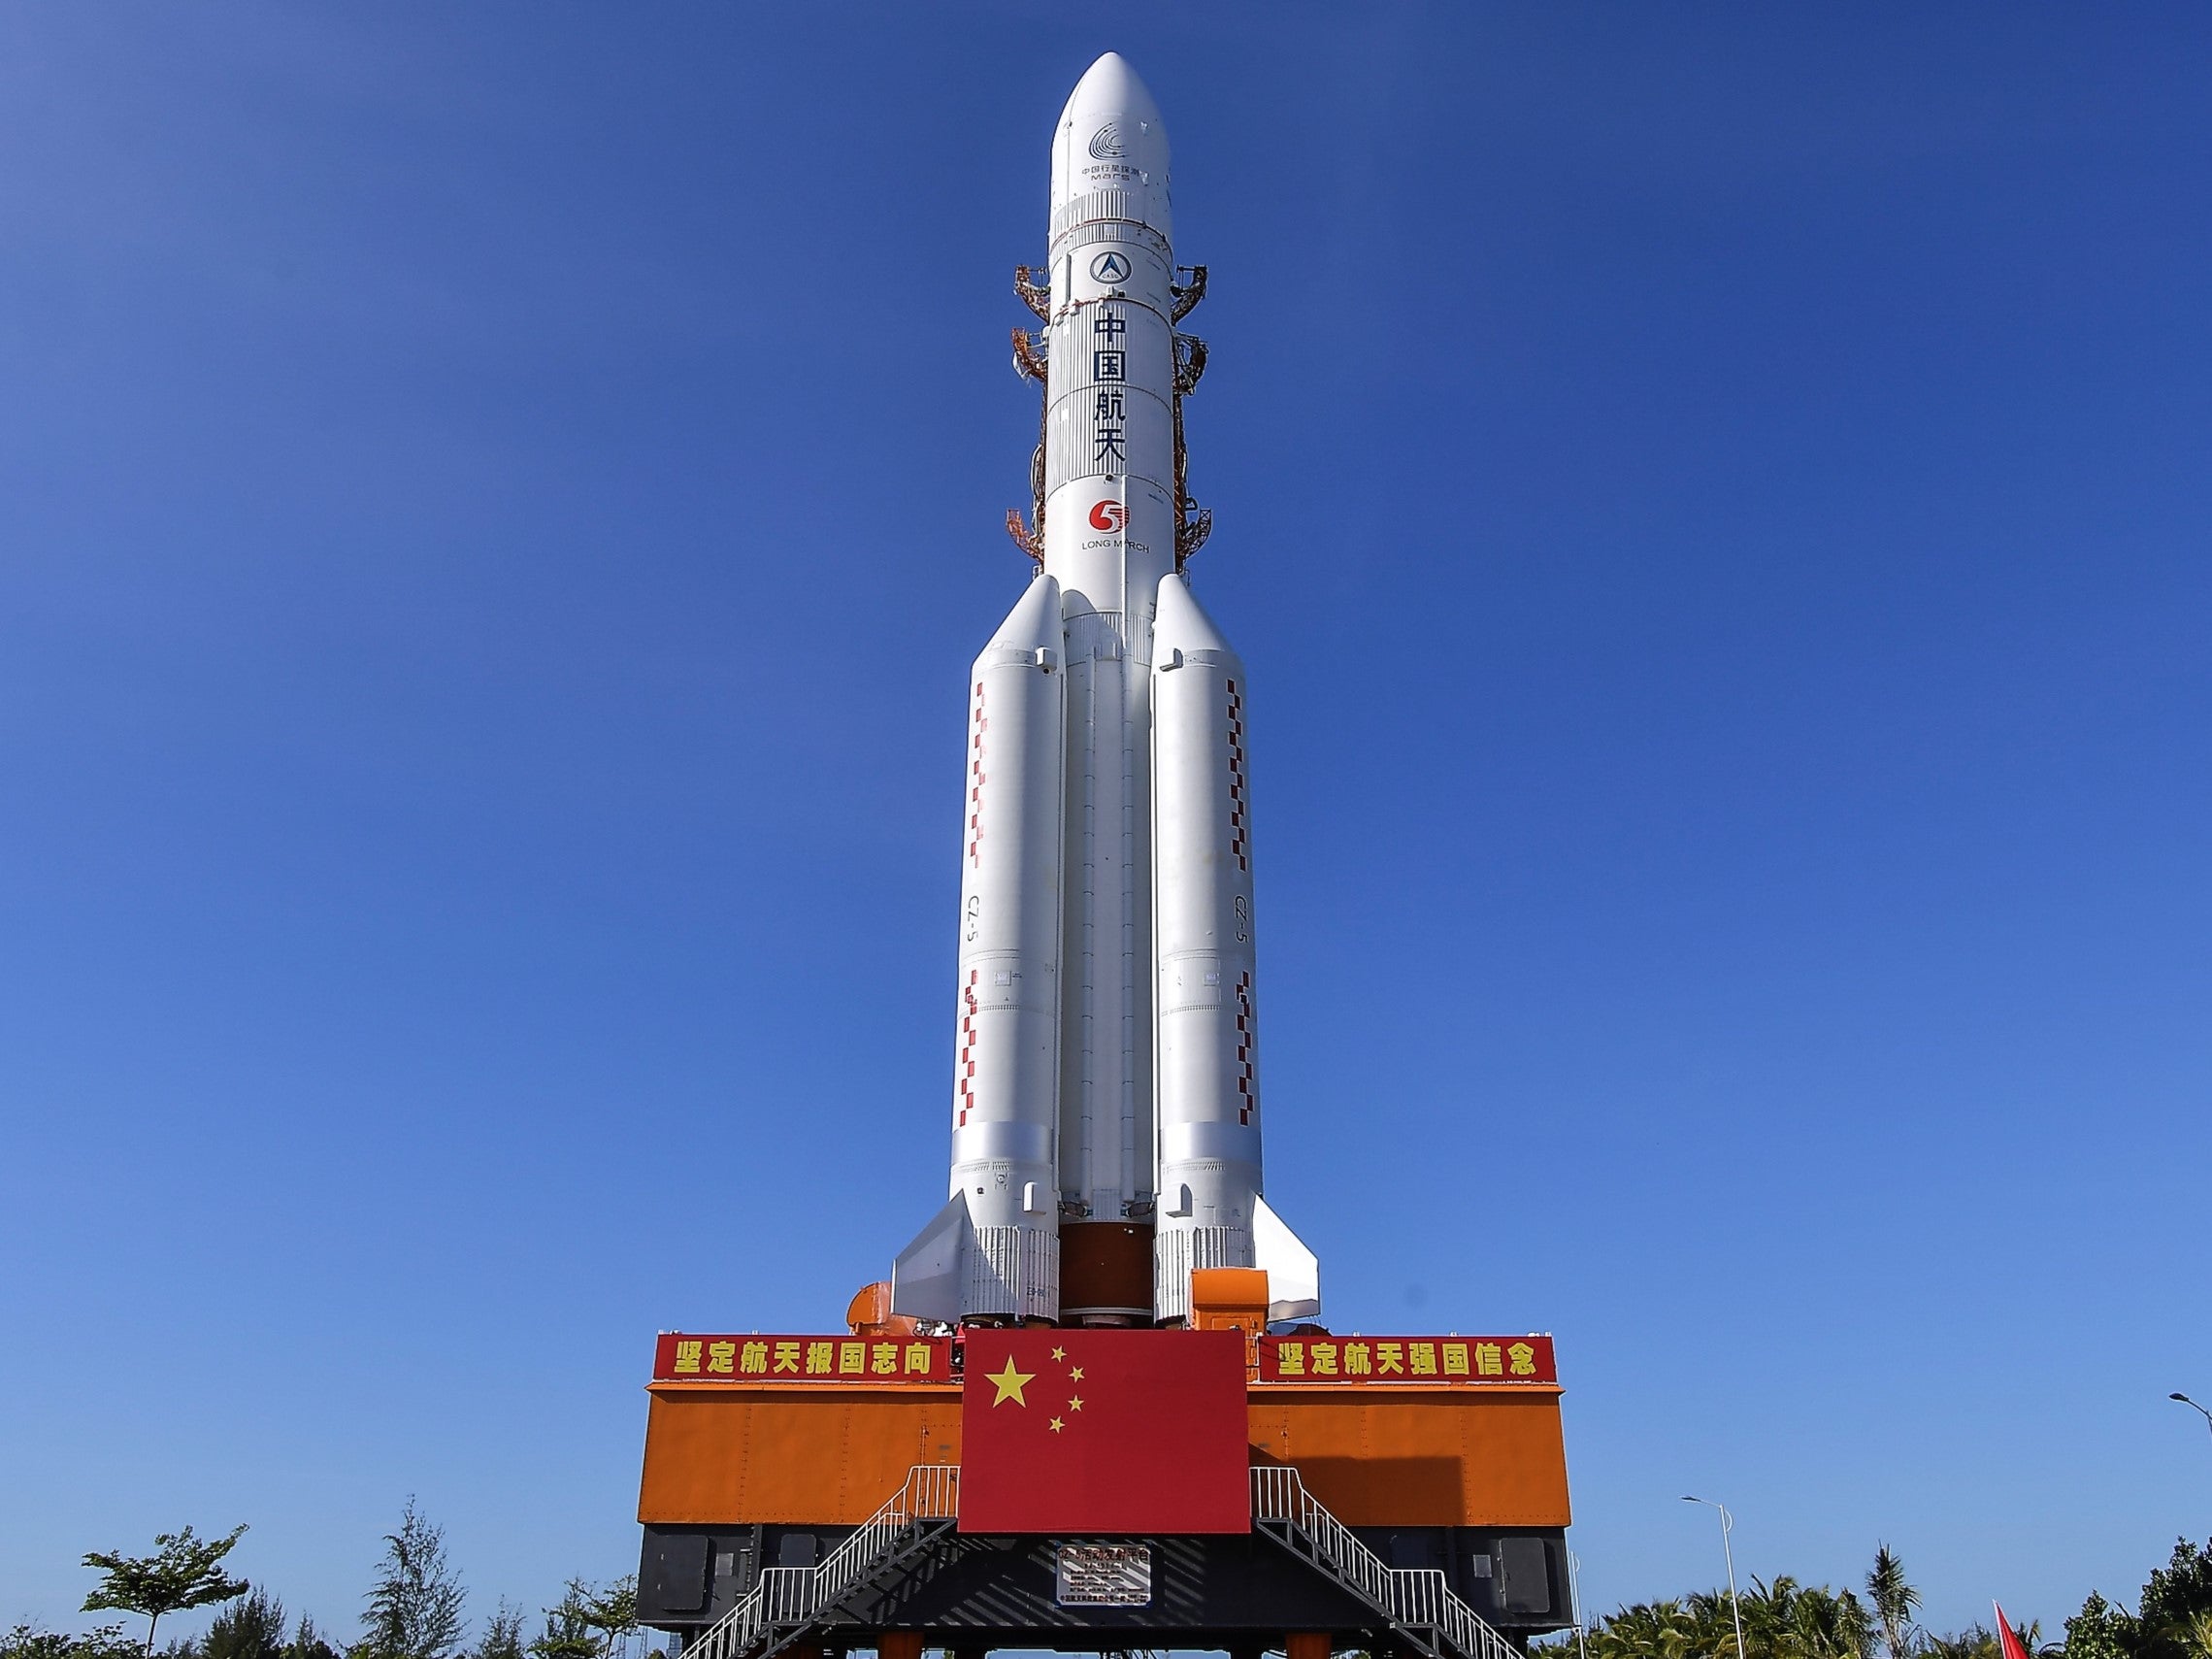 China’s Long March-5 Y5 rocket at the Wenchang Spacecraft Launch Site in the Hainan province